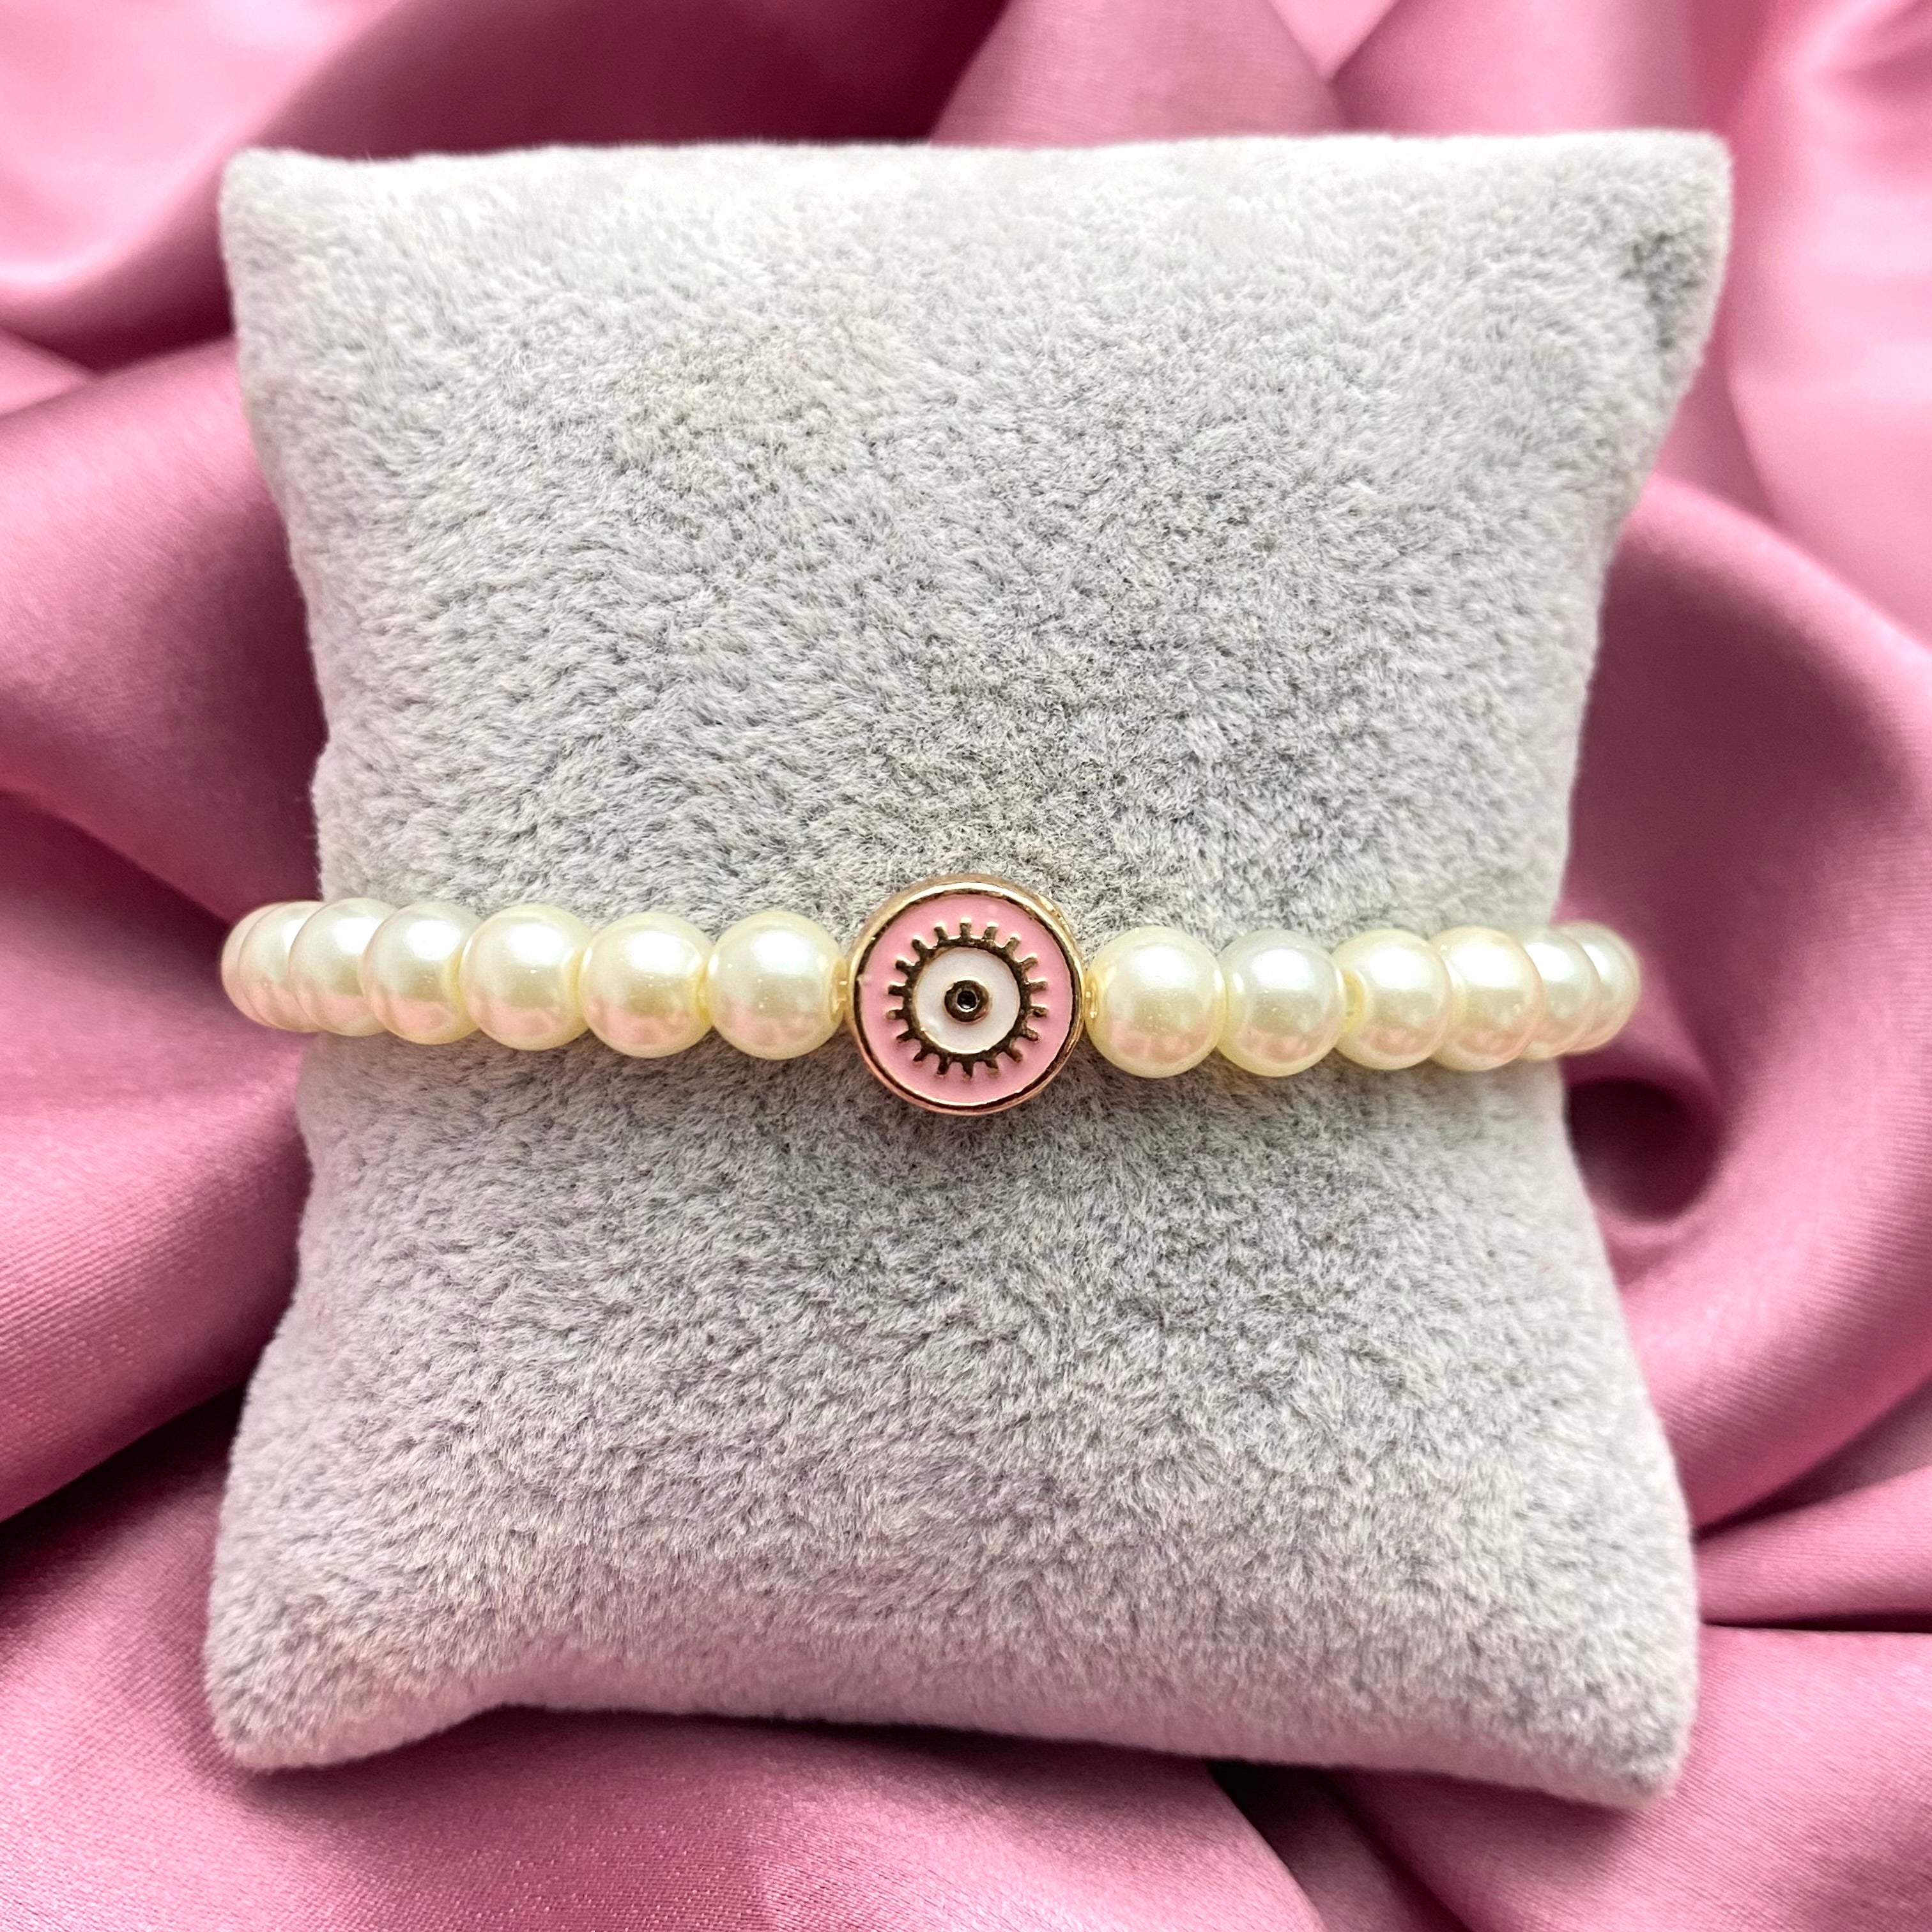 Princess Pearls.gold Pearl Bracelet, Dual Chain Bracelet With Pearl  Charm,elegant Bracelet,delicate Design,unique Gold With Pearl,gift Ideas -  Etsy